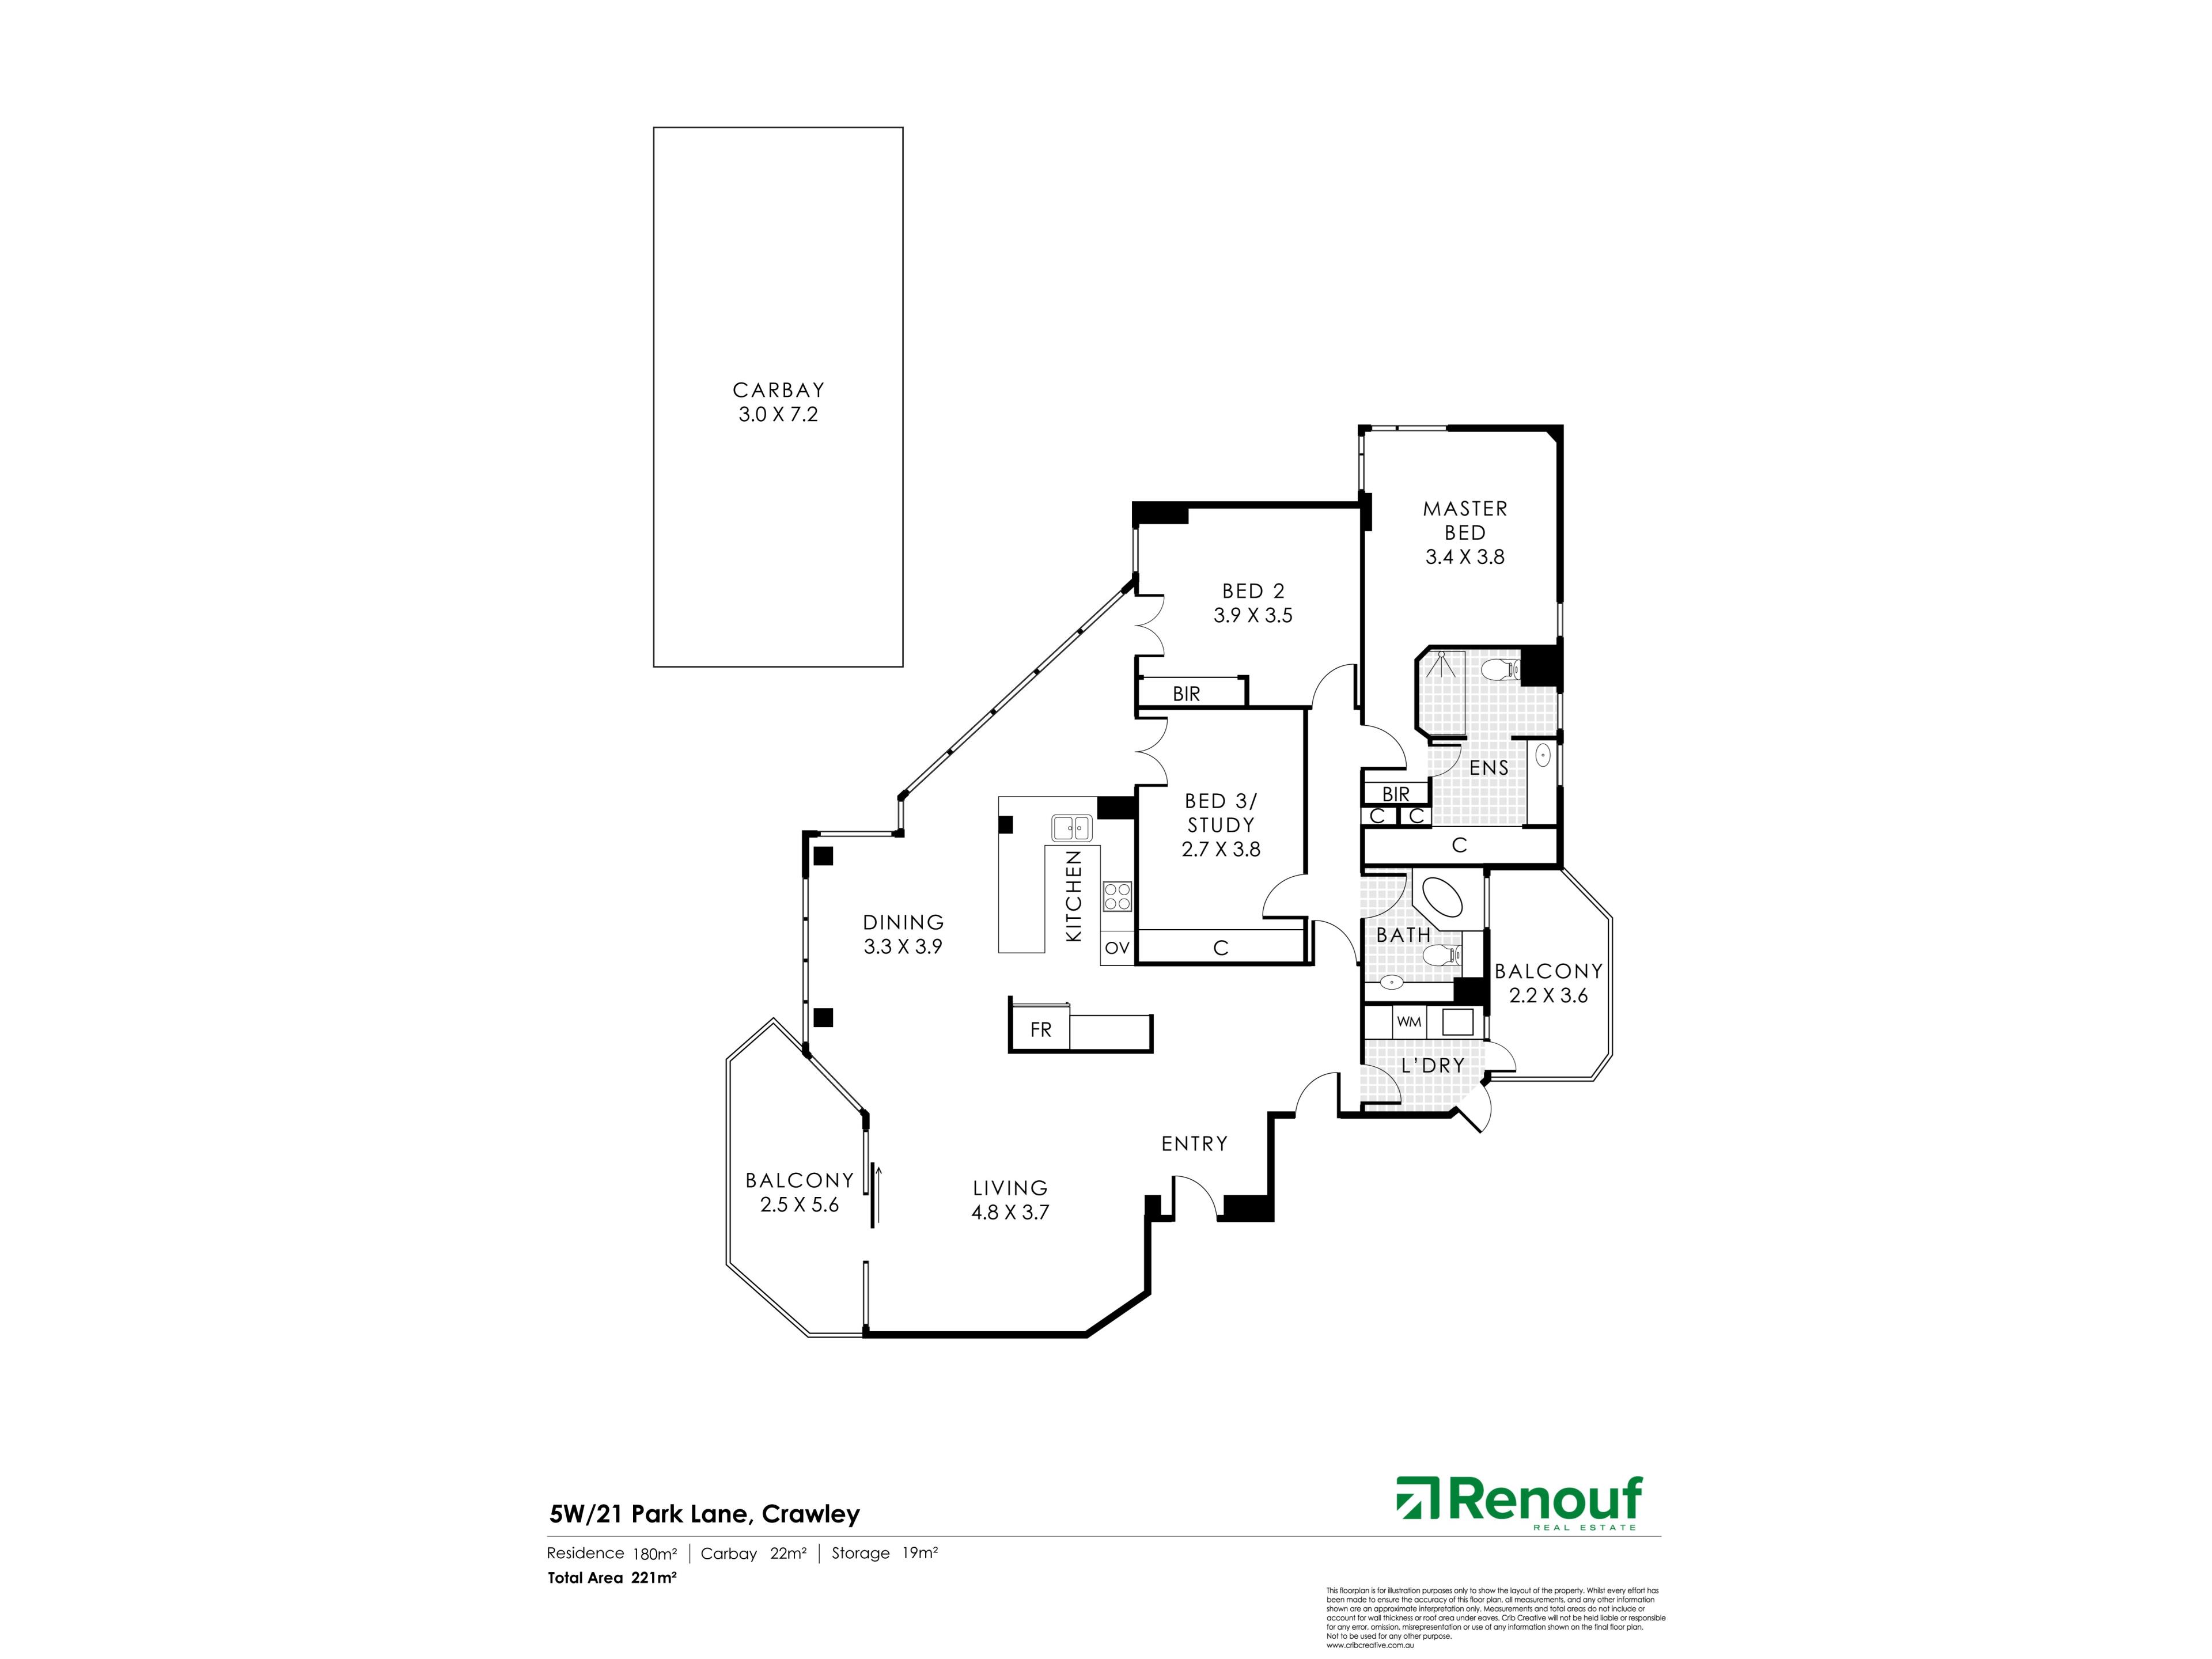 Property for sale in Crawley